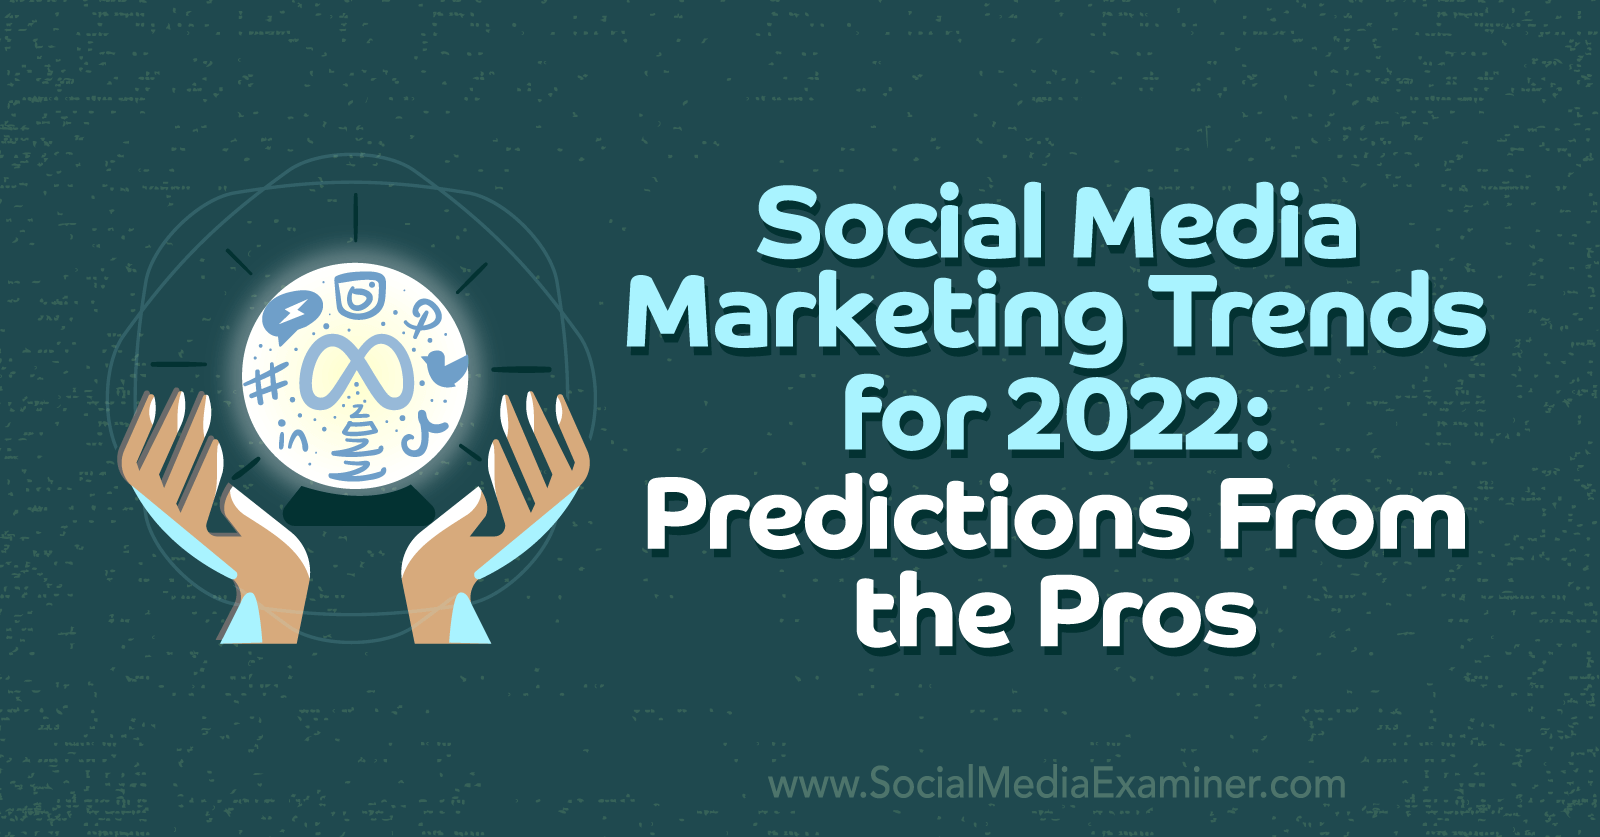 Social Media Marketing Trends for 2022 Predictions From the Pros